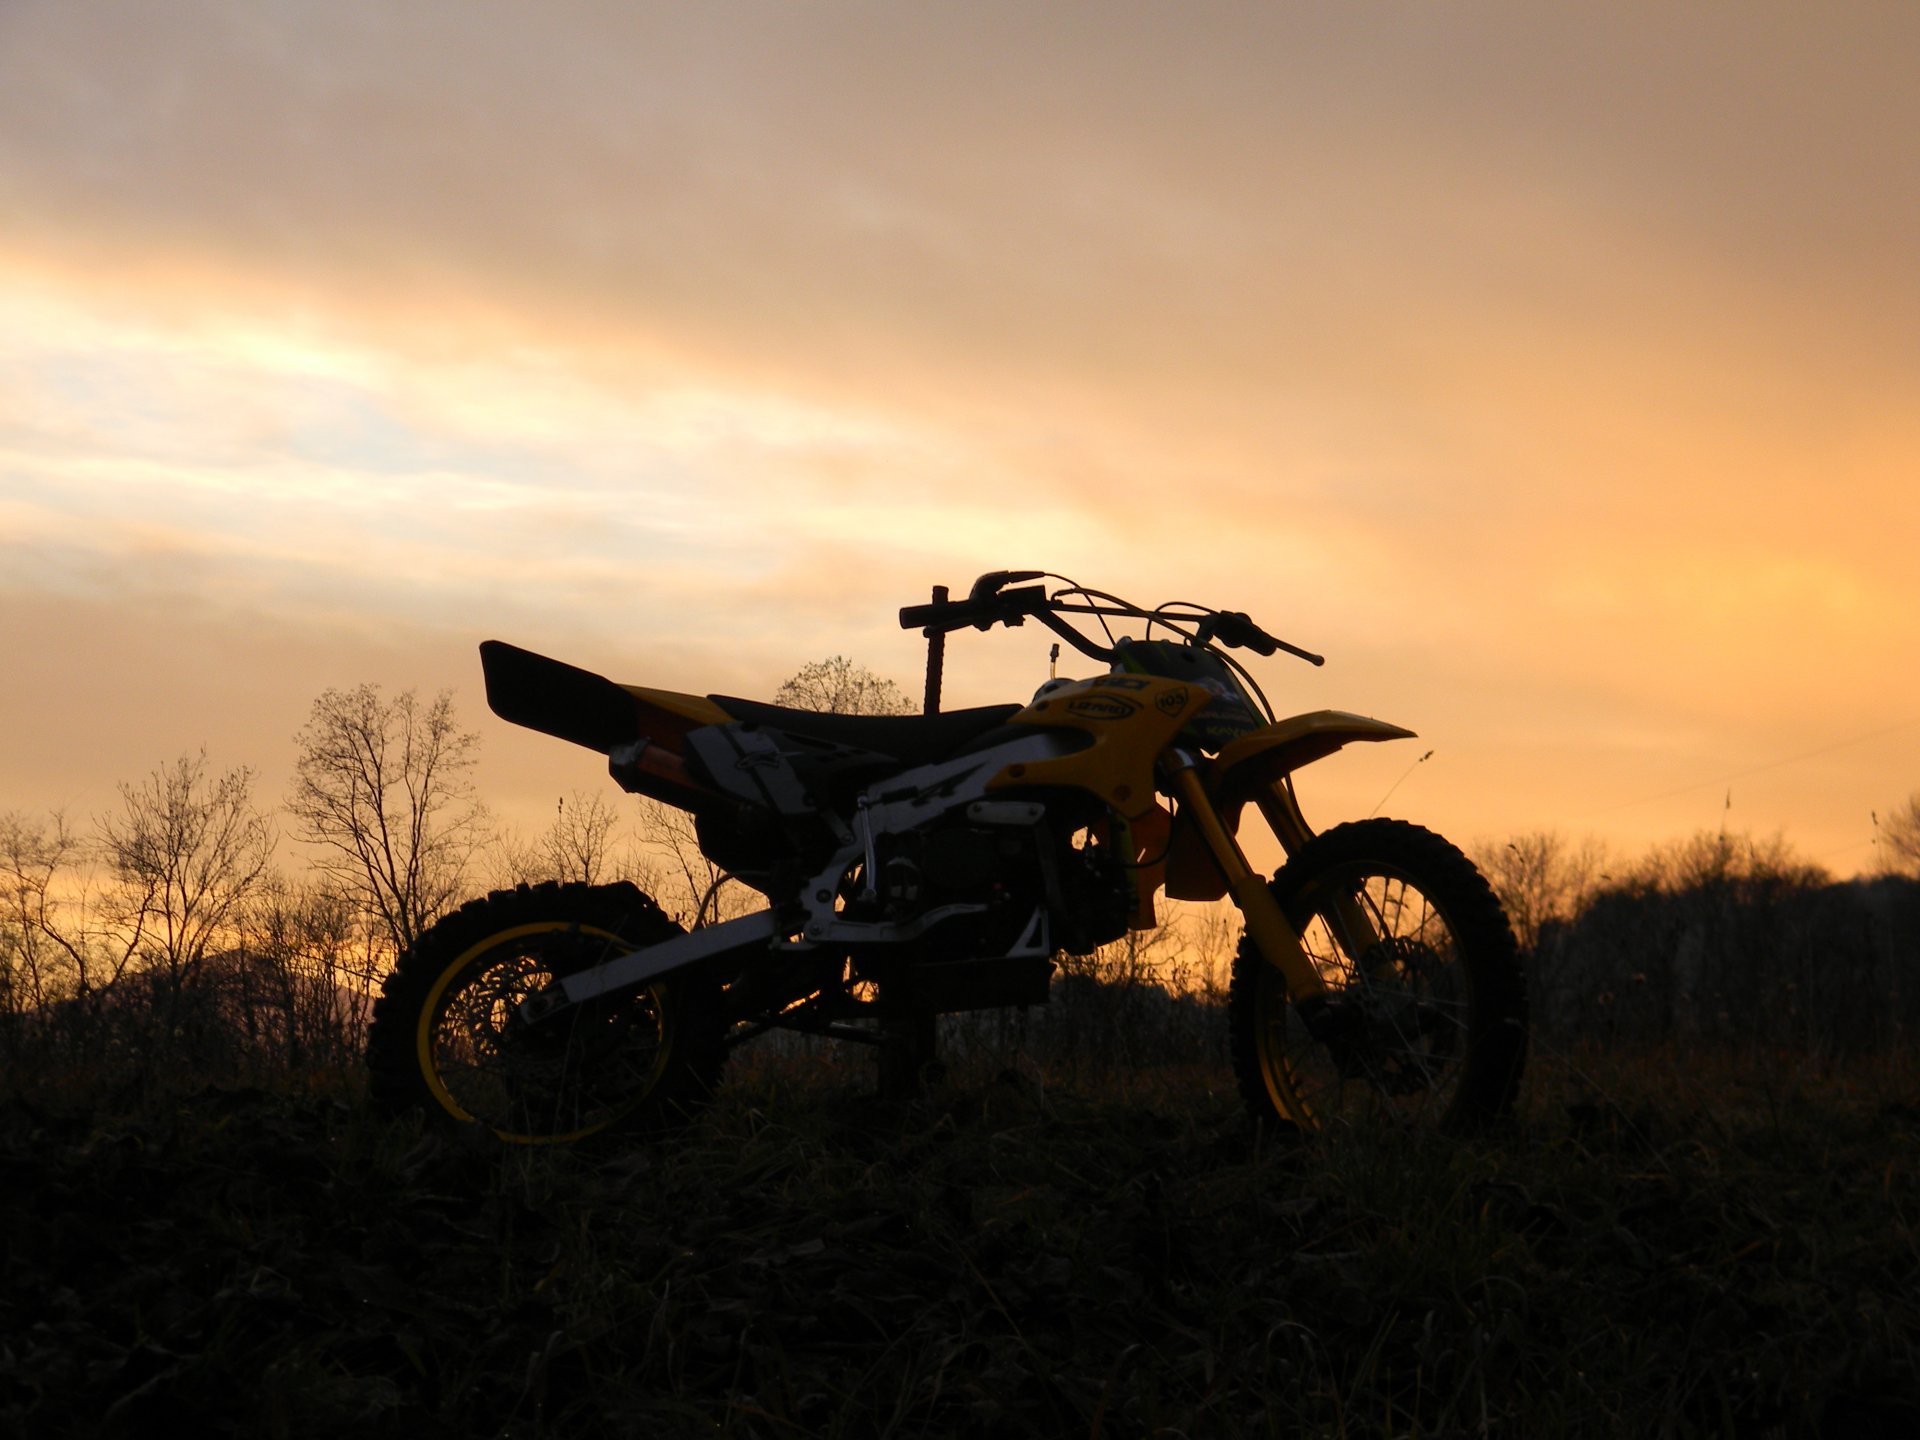 download the last version for ipod Sunset Bike Racing - Motocross